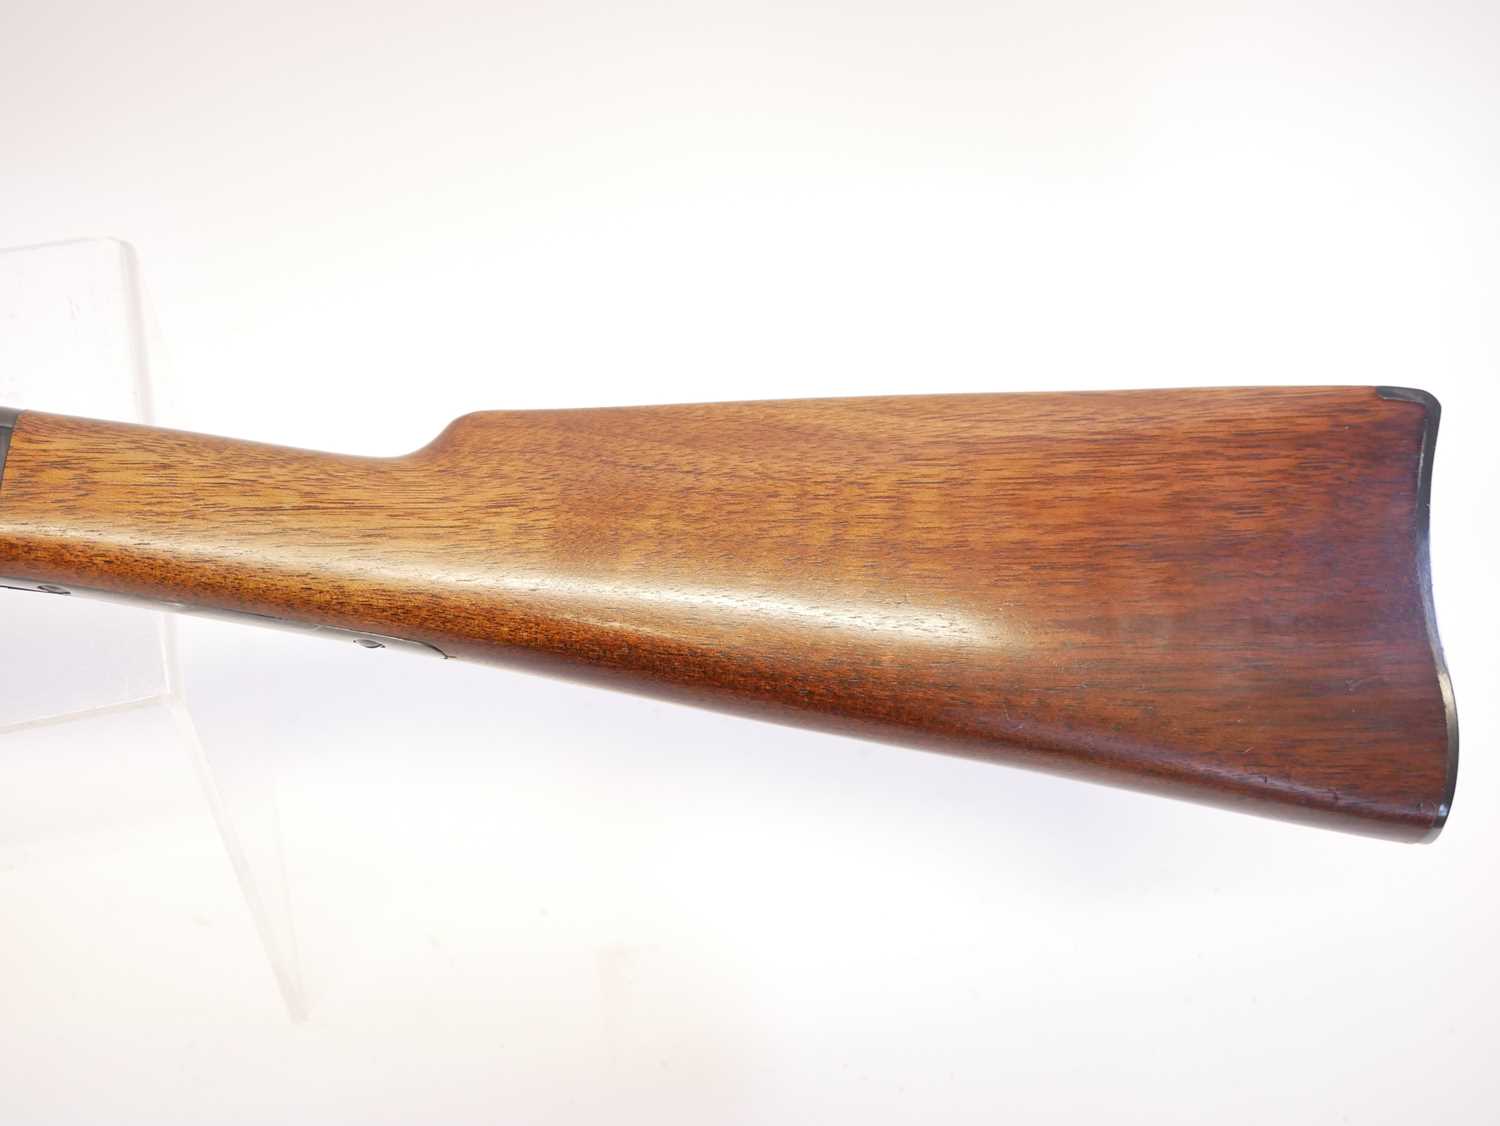 Pietta .50 cal Percussion capping breech loading Smith's carbine, serial number 3785, 21.5inch - Image 10 of 12